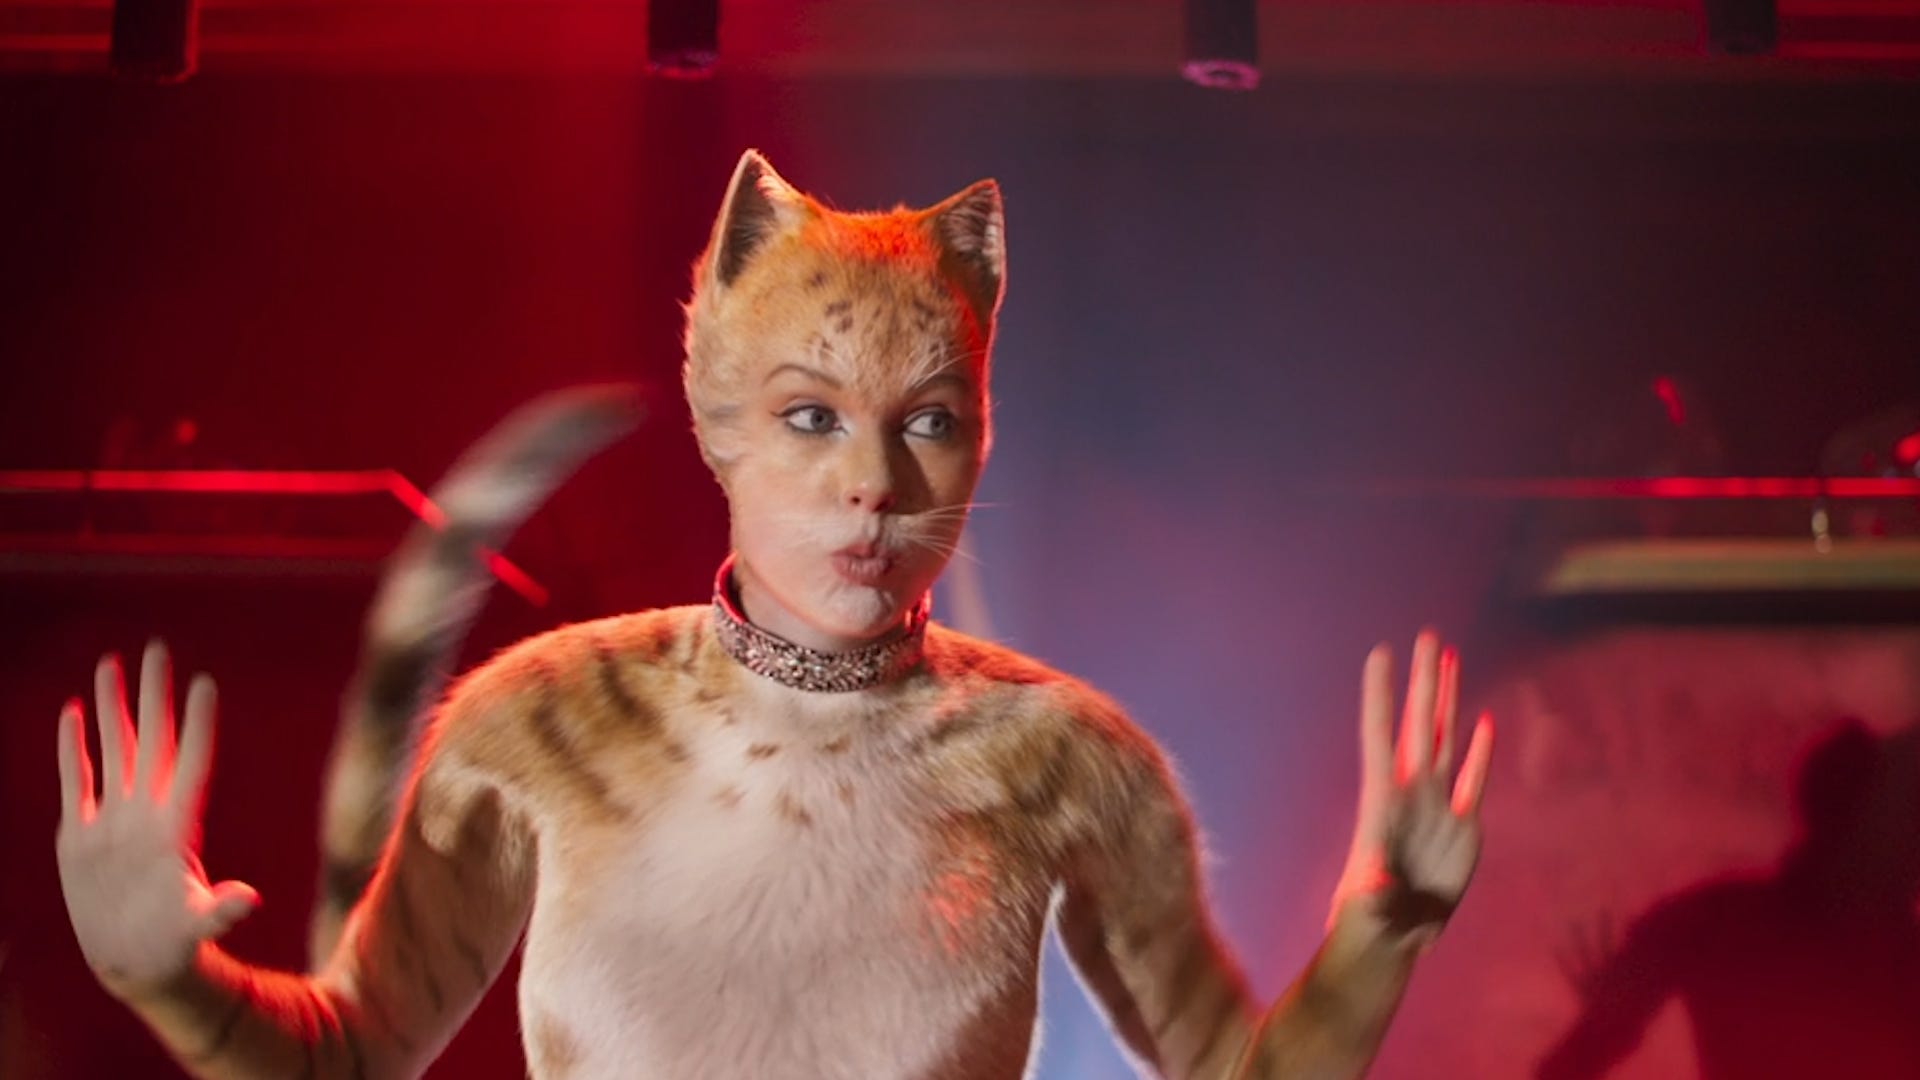 A Cats Butthole Cut Trailer Is Out An Analysis Of Its Alternative Reality